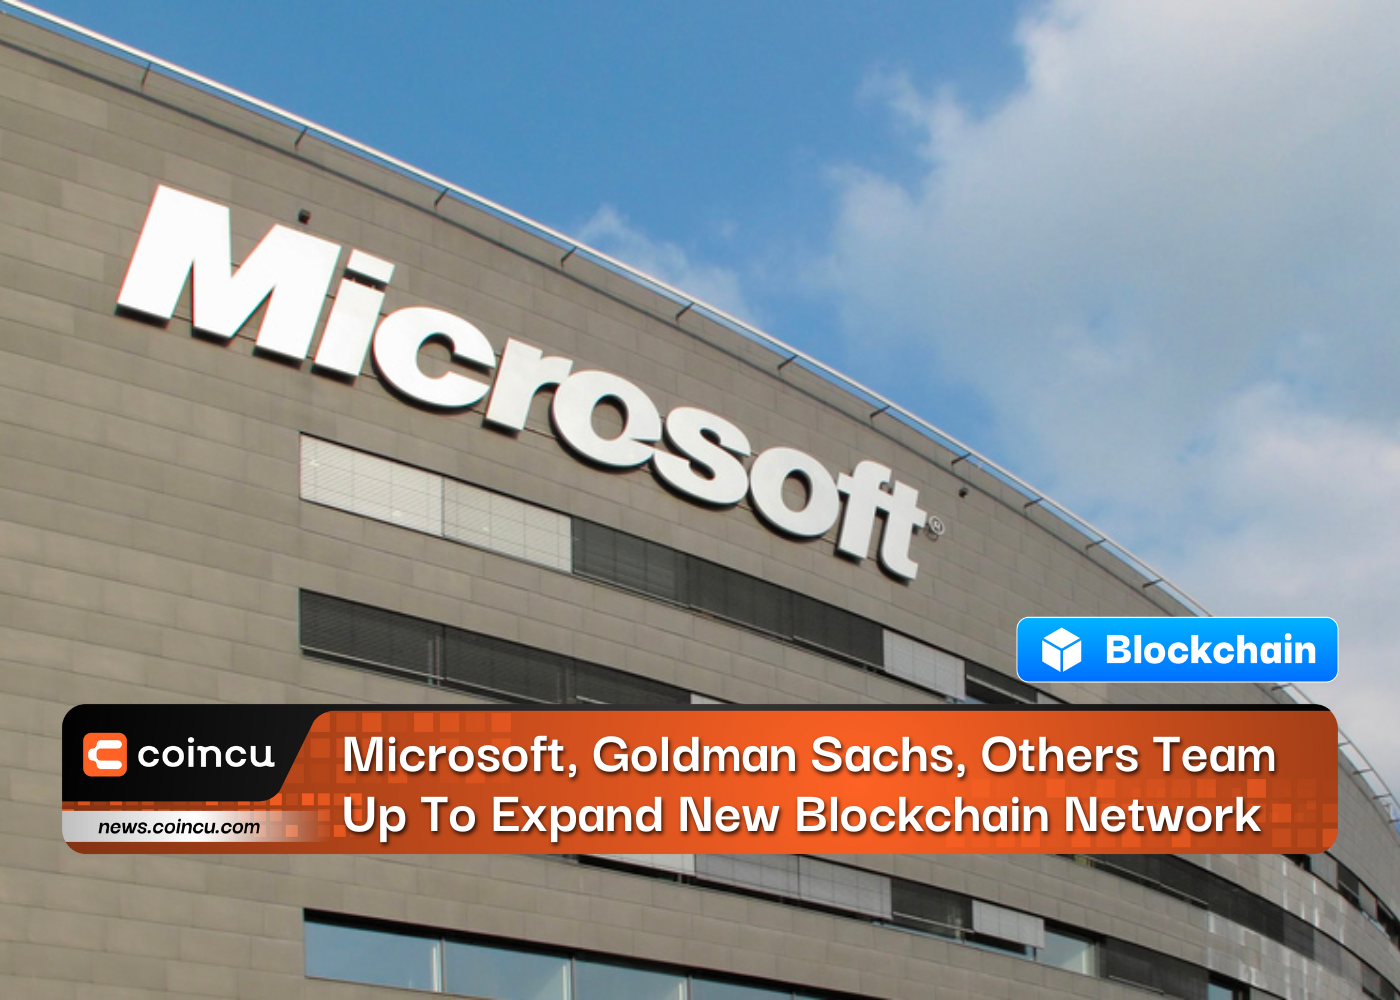 Microsoft, Goldman Sachs, Others Team Up To Expand New Blockchain Network